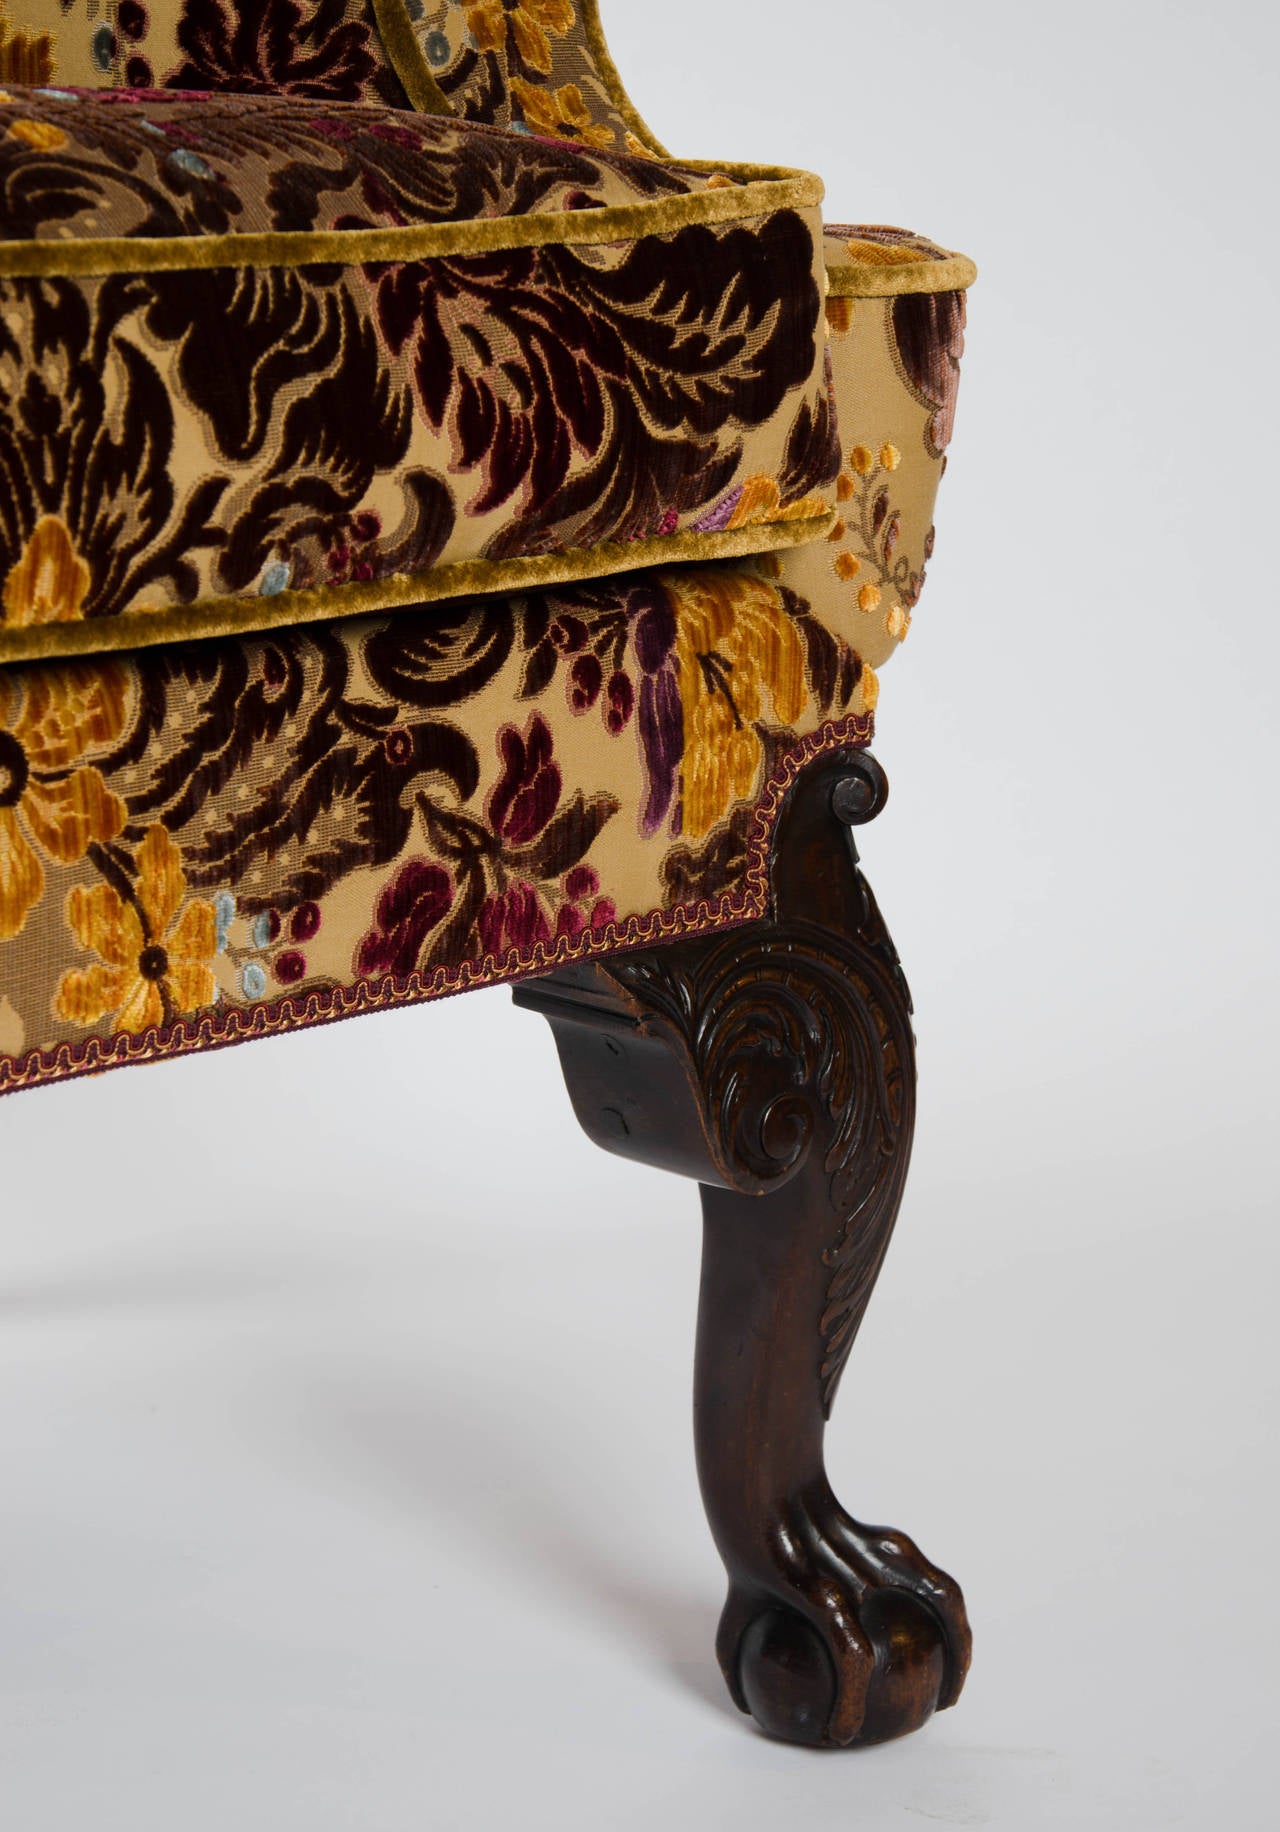 An exceptional quality 19th century wing chair of fine 18th century proportions. Cabriole legs front and back; the profusely carved front legs with claw and ball feet, the back with C-scroll detail and pad feet.